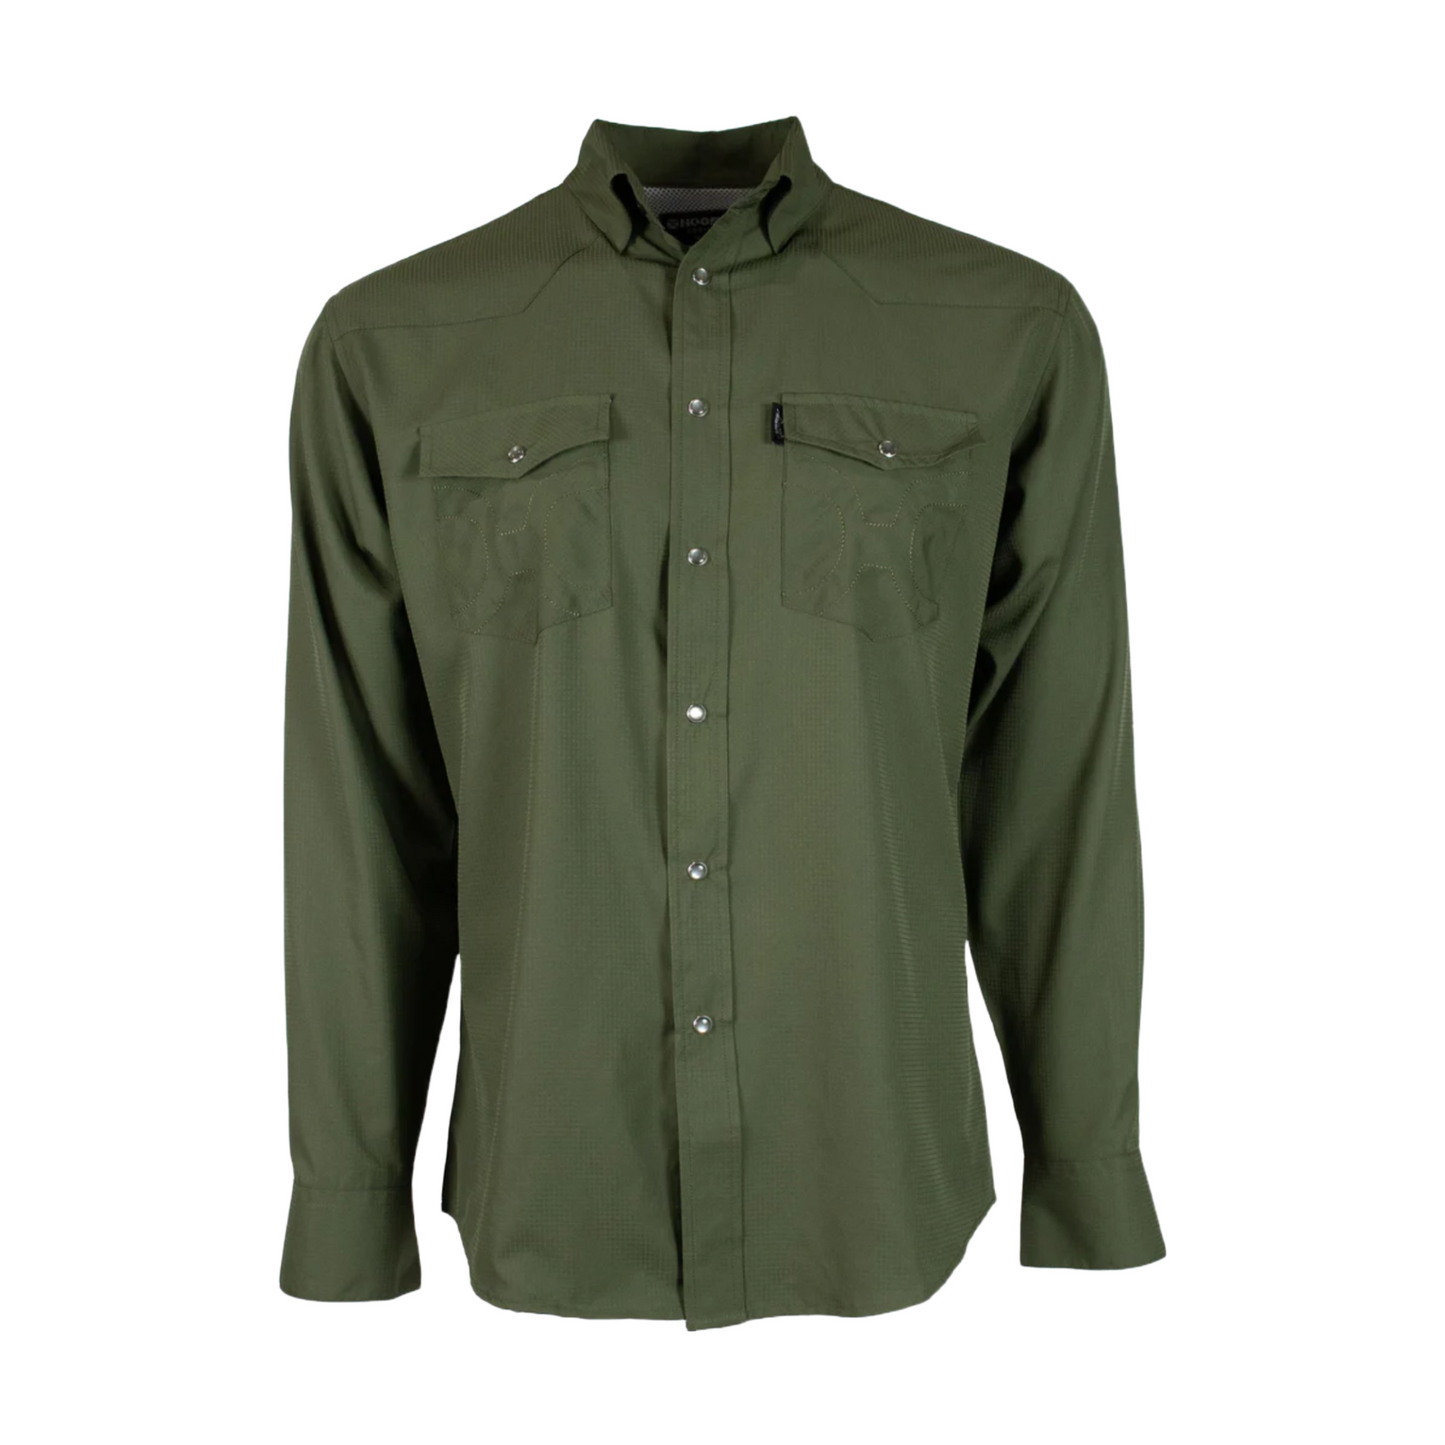 Hooey Men's SOL Olive Green Snap Button Down Shirt HT1612OL